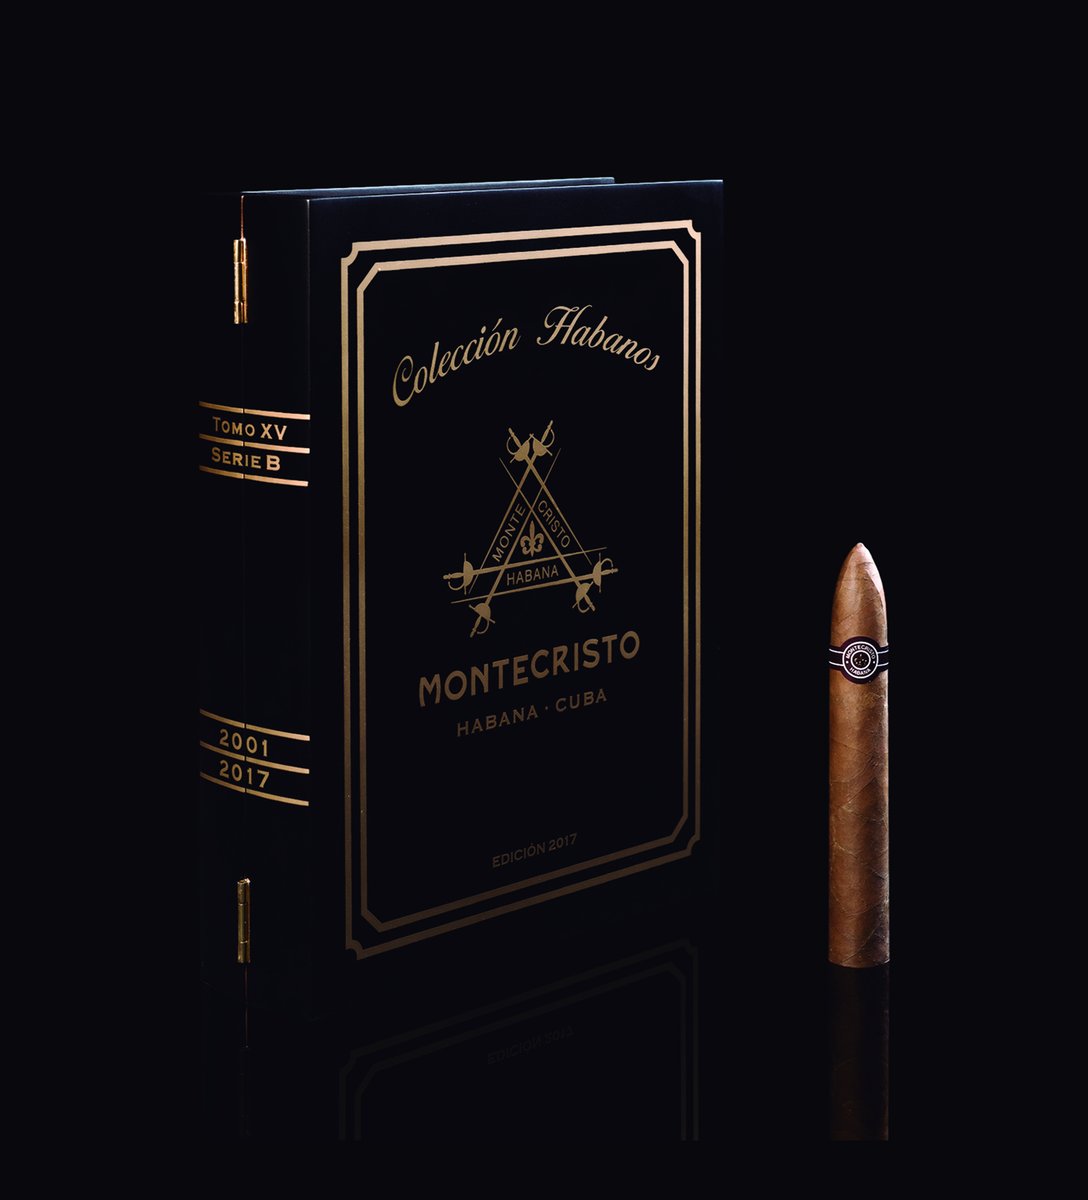 Celebrate this #BookDay by 'sharing' one of your favourite vitolas with some literary classics. Enjoy a memorable evening where the pleasures of reading and the sophisticated flavours of a Habano merge to create a #MyHabanosMoment of enjoyment and reflection.